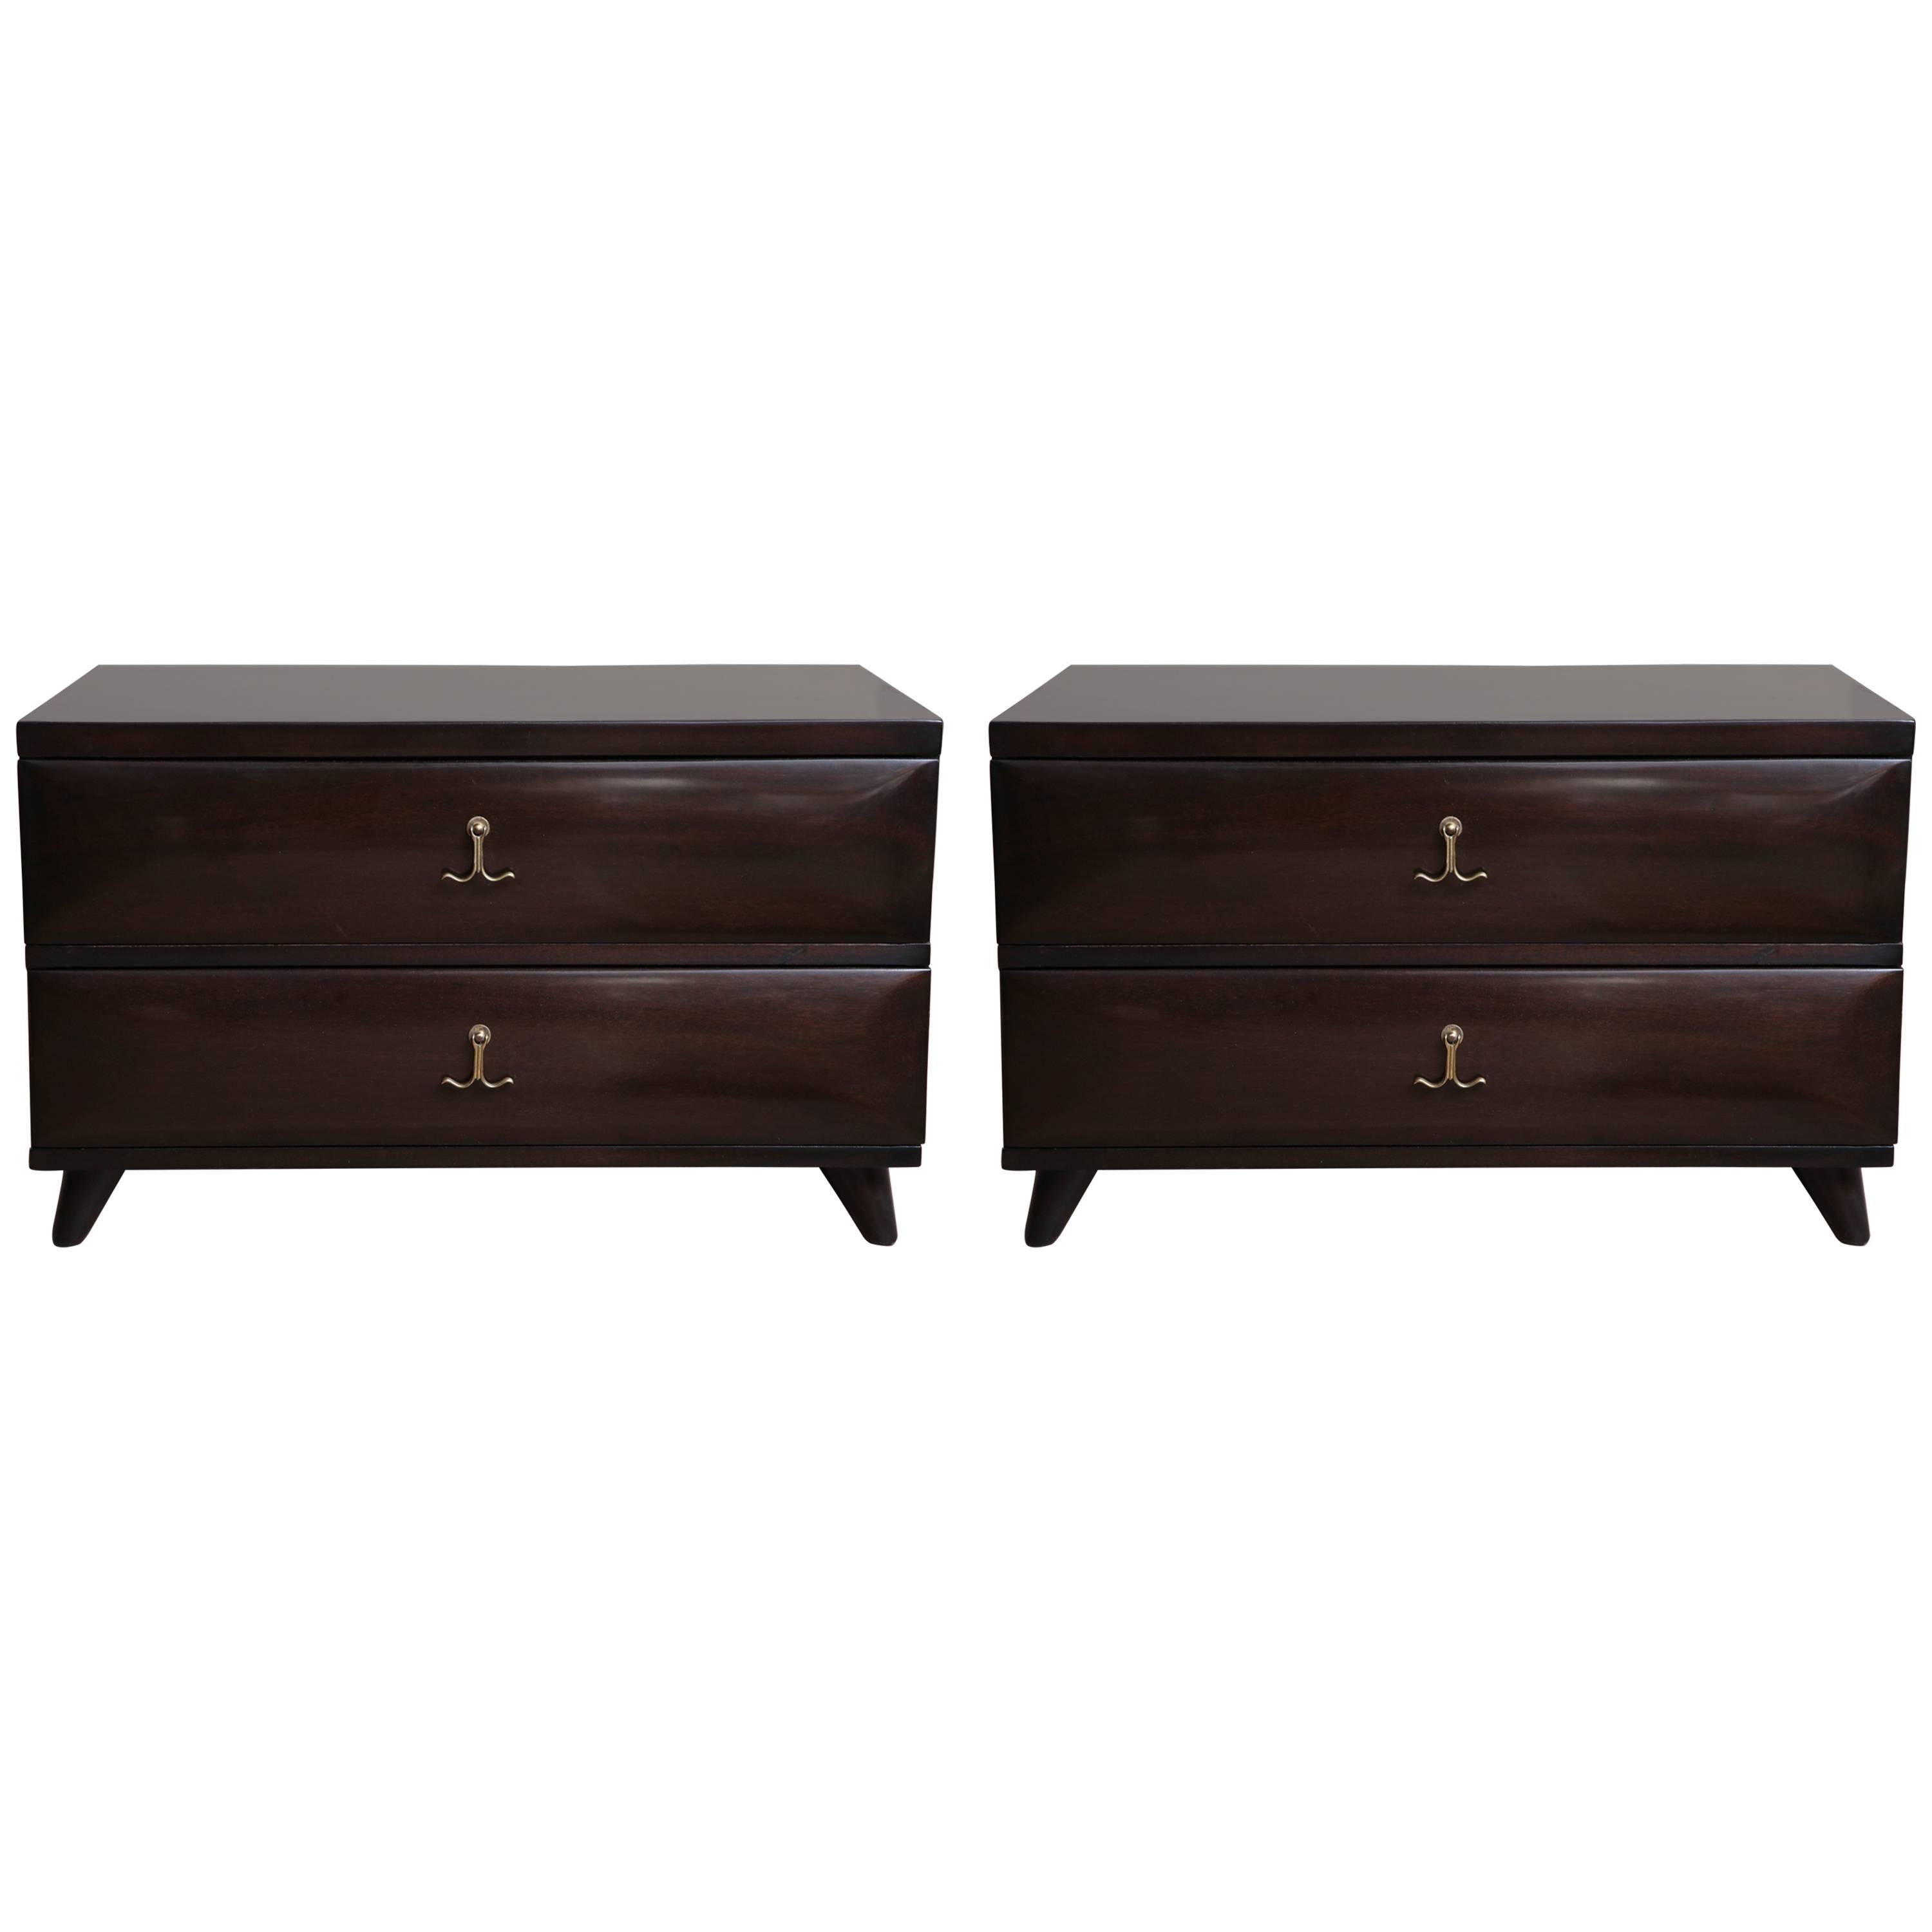 Pair of Mahogany Two-Drawer Chests